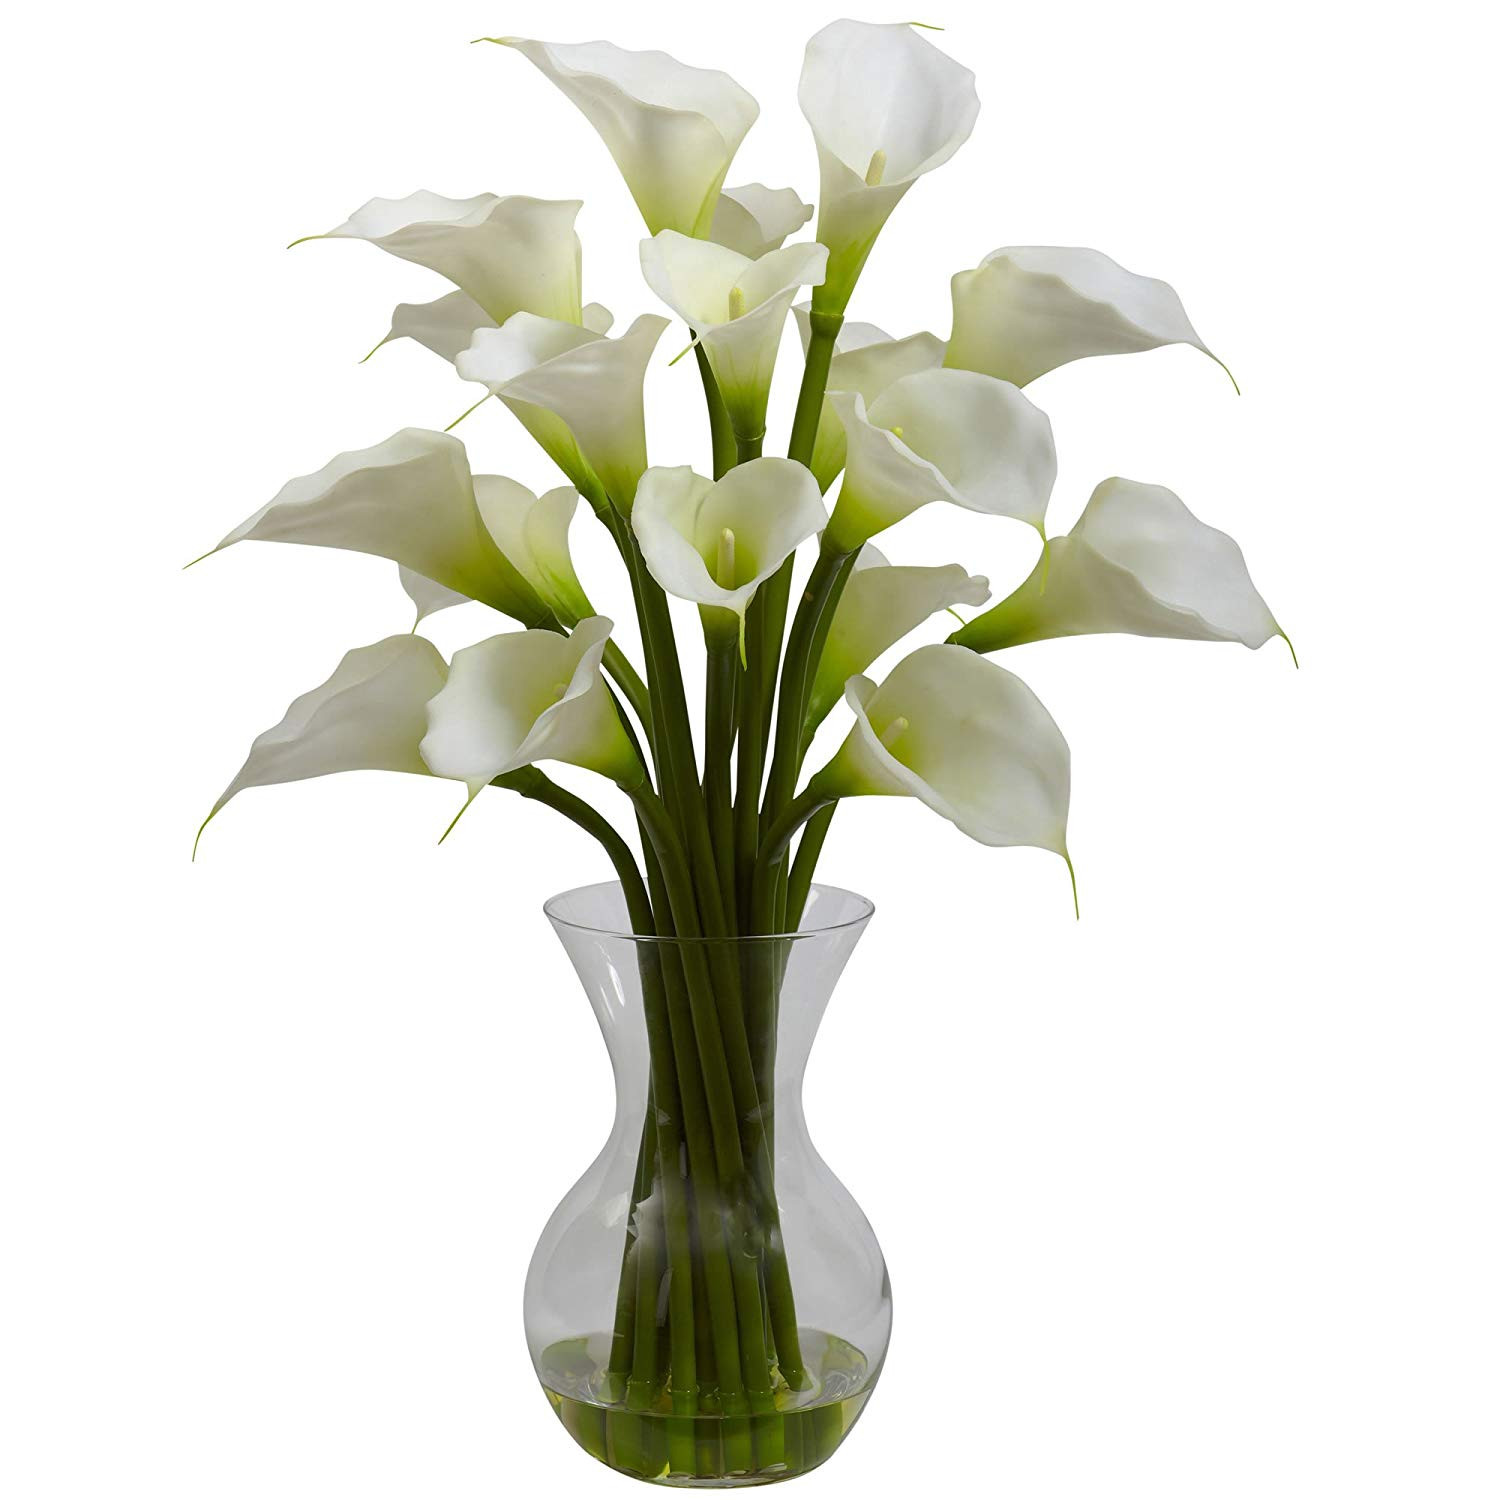 calla lily in vase photo of amazon com nearly natural 1299 cr galla calla lily with vase within amazon com nearly natural 1299 cr galla calla lily with vase arrangement cream home kitchen